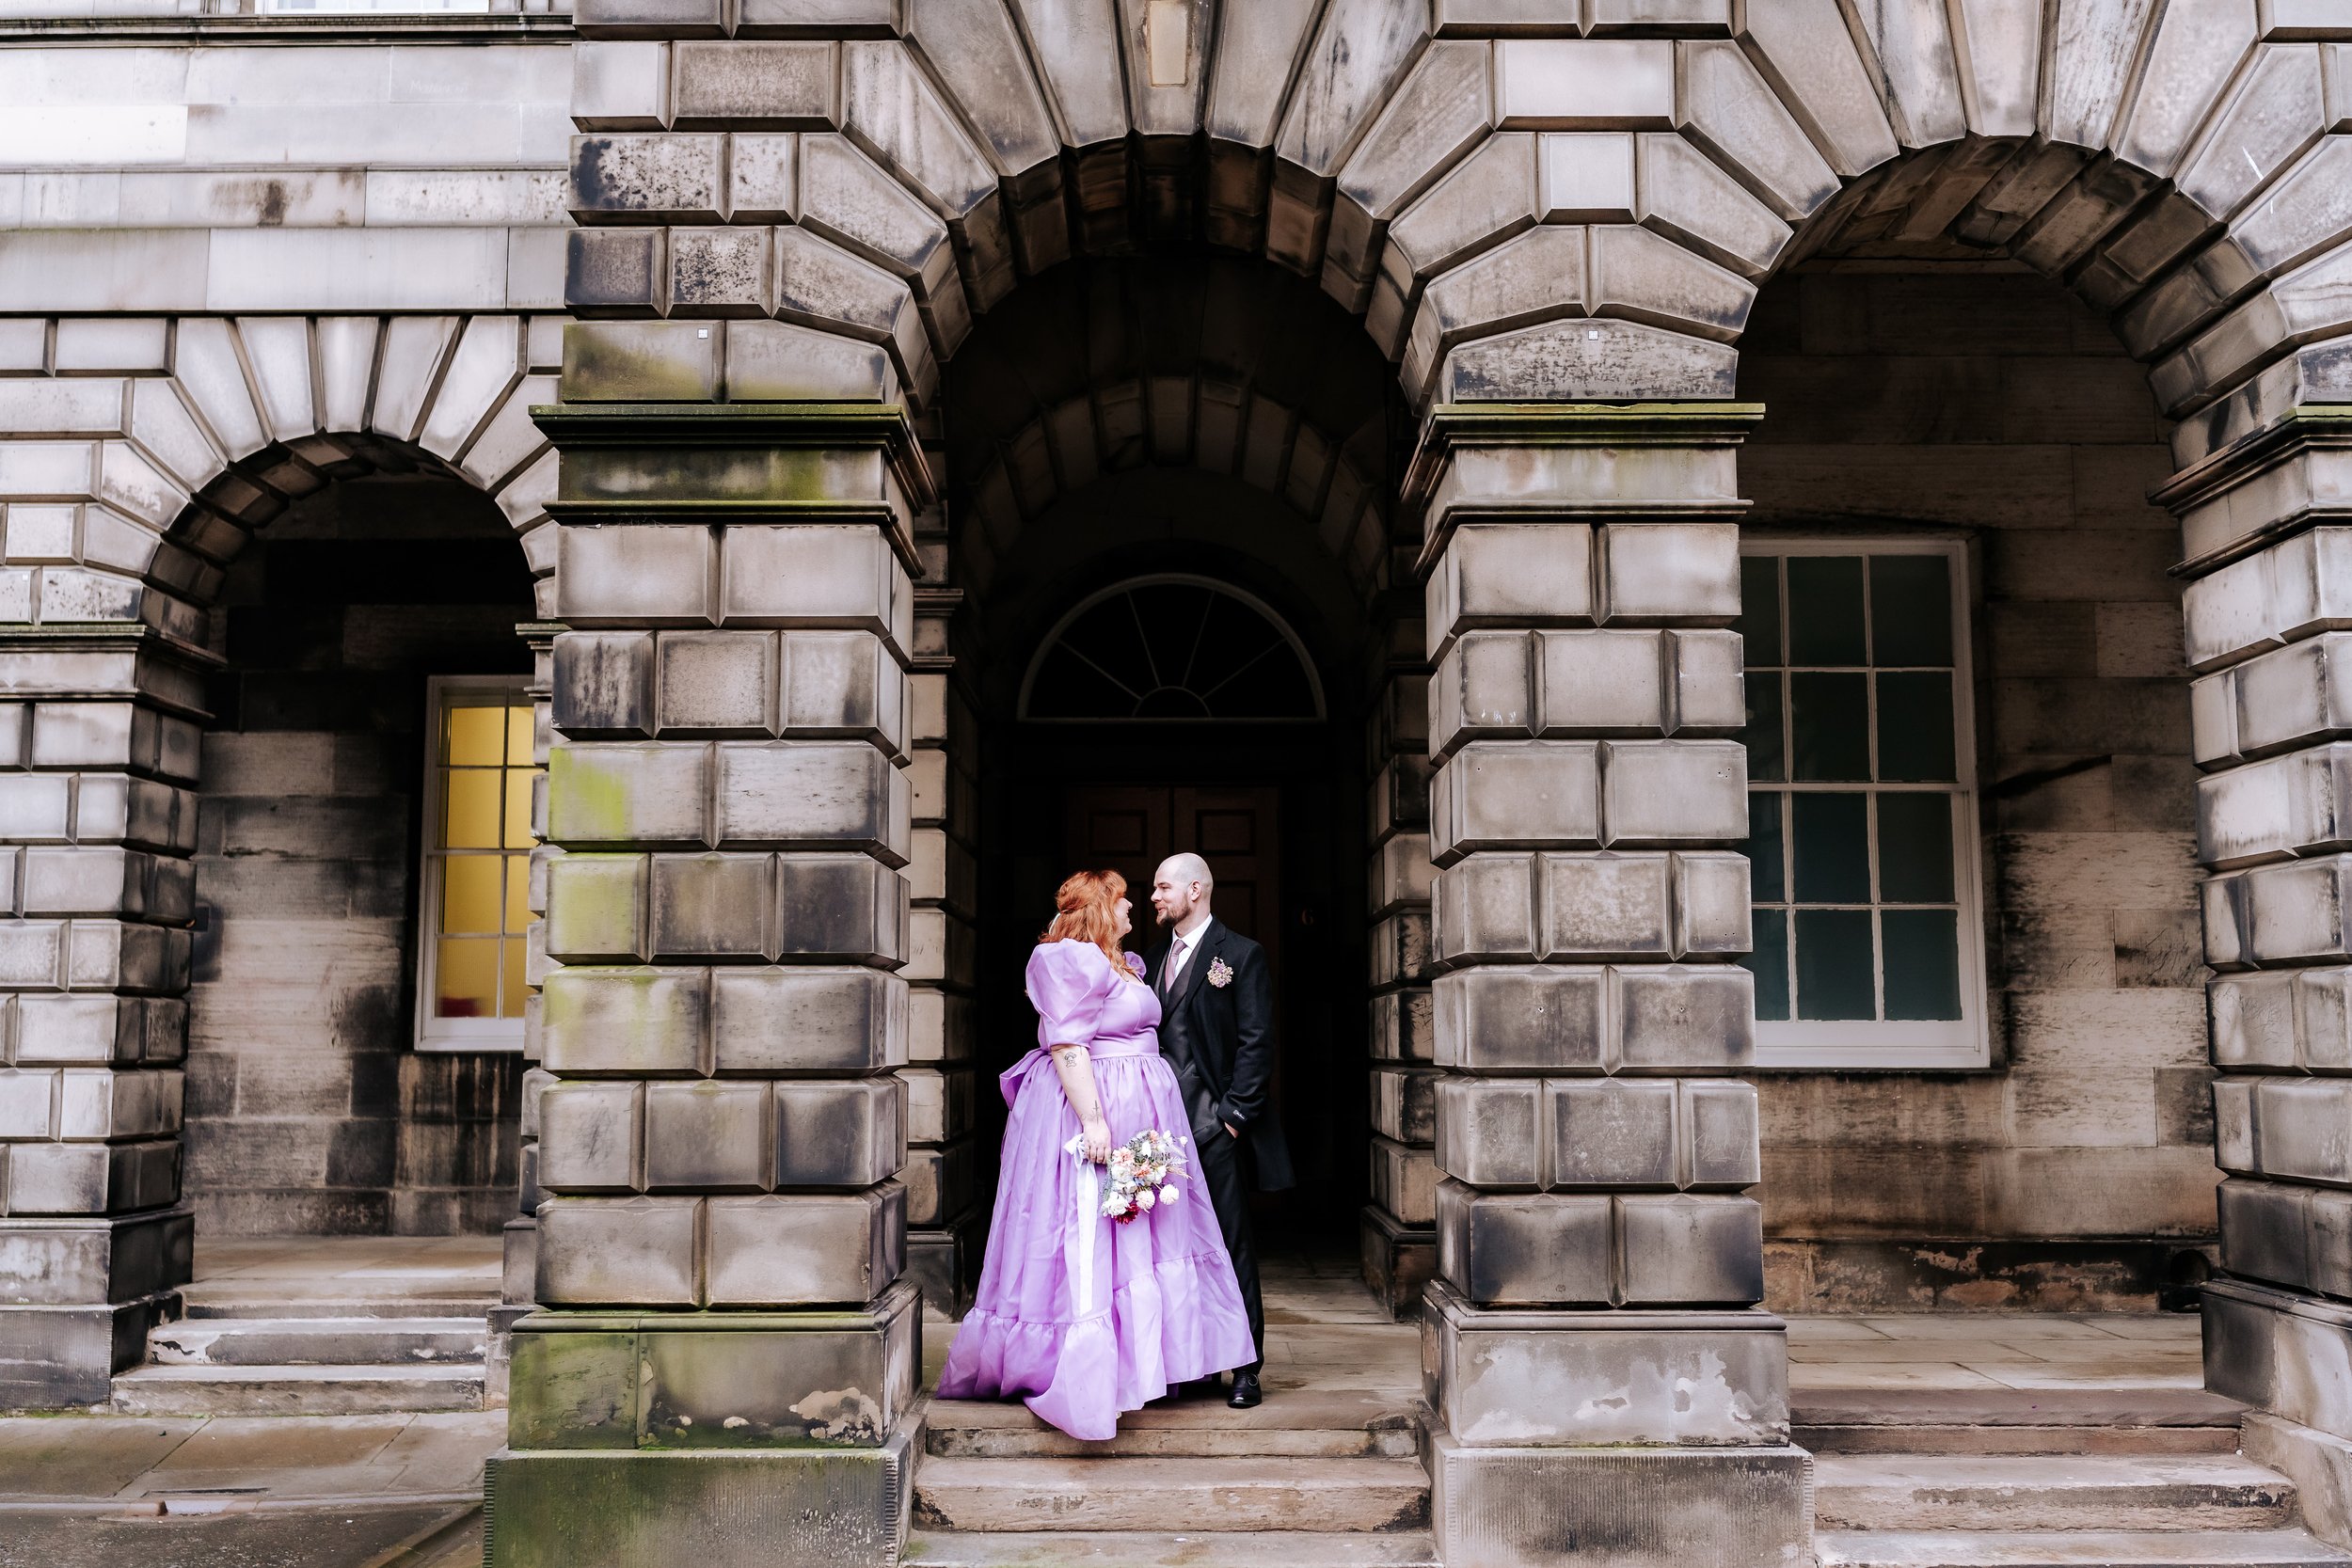 Finding the perfect wedding photographer - Lou Rob Photo - Edinburgh Wedding Photographer